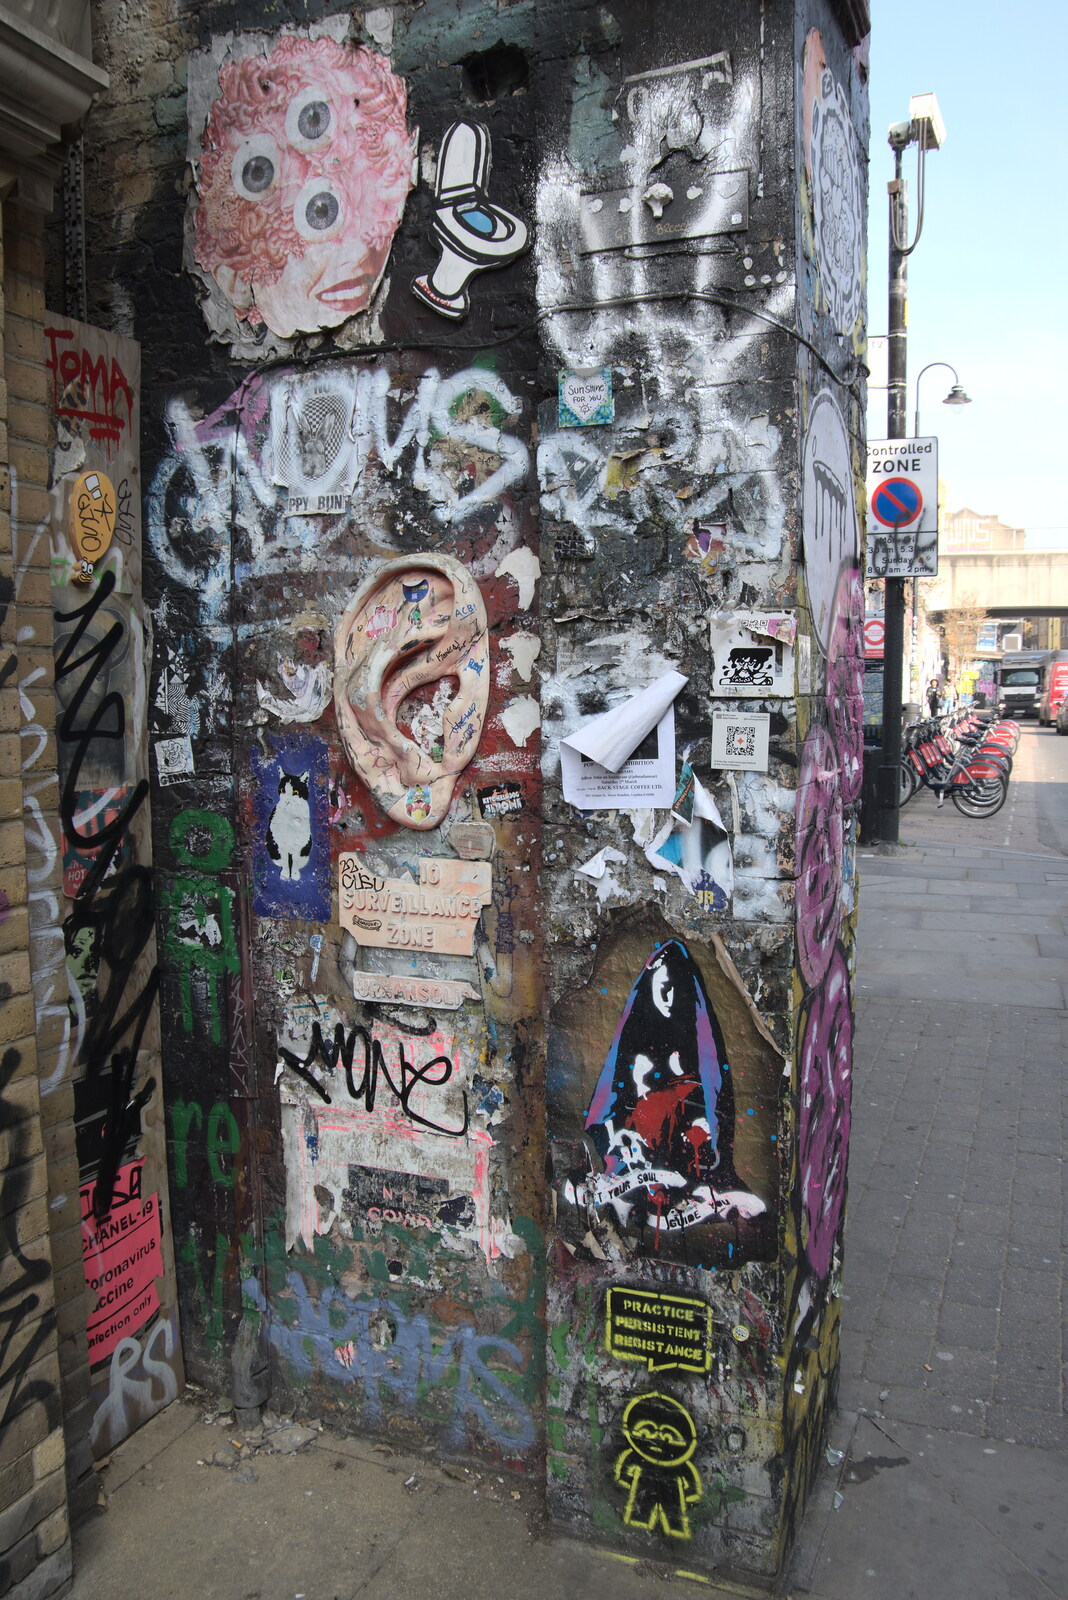 A Walk Around the South Bank, London - 25th March 2022: There's a 3-D ear stuck to a wall